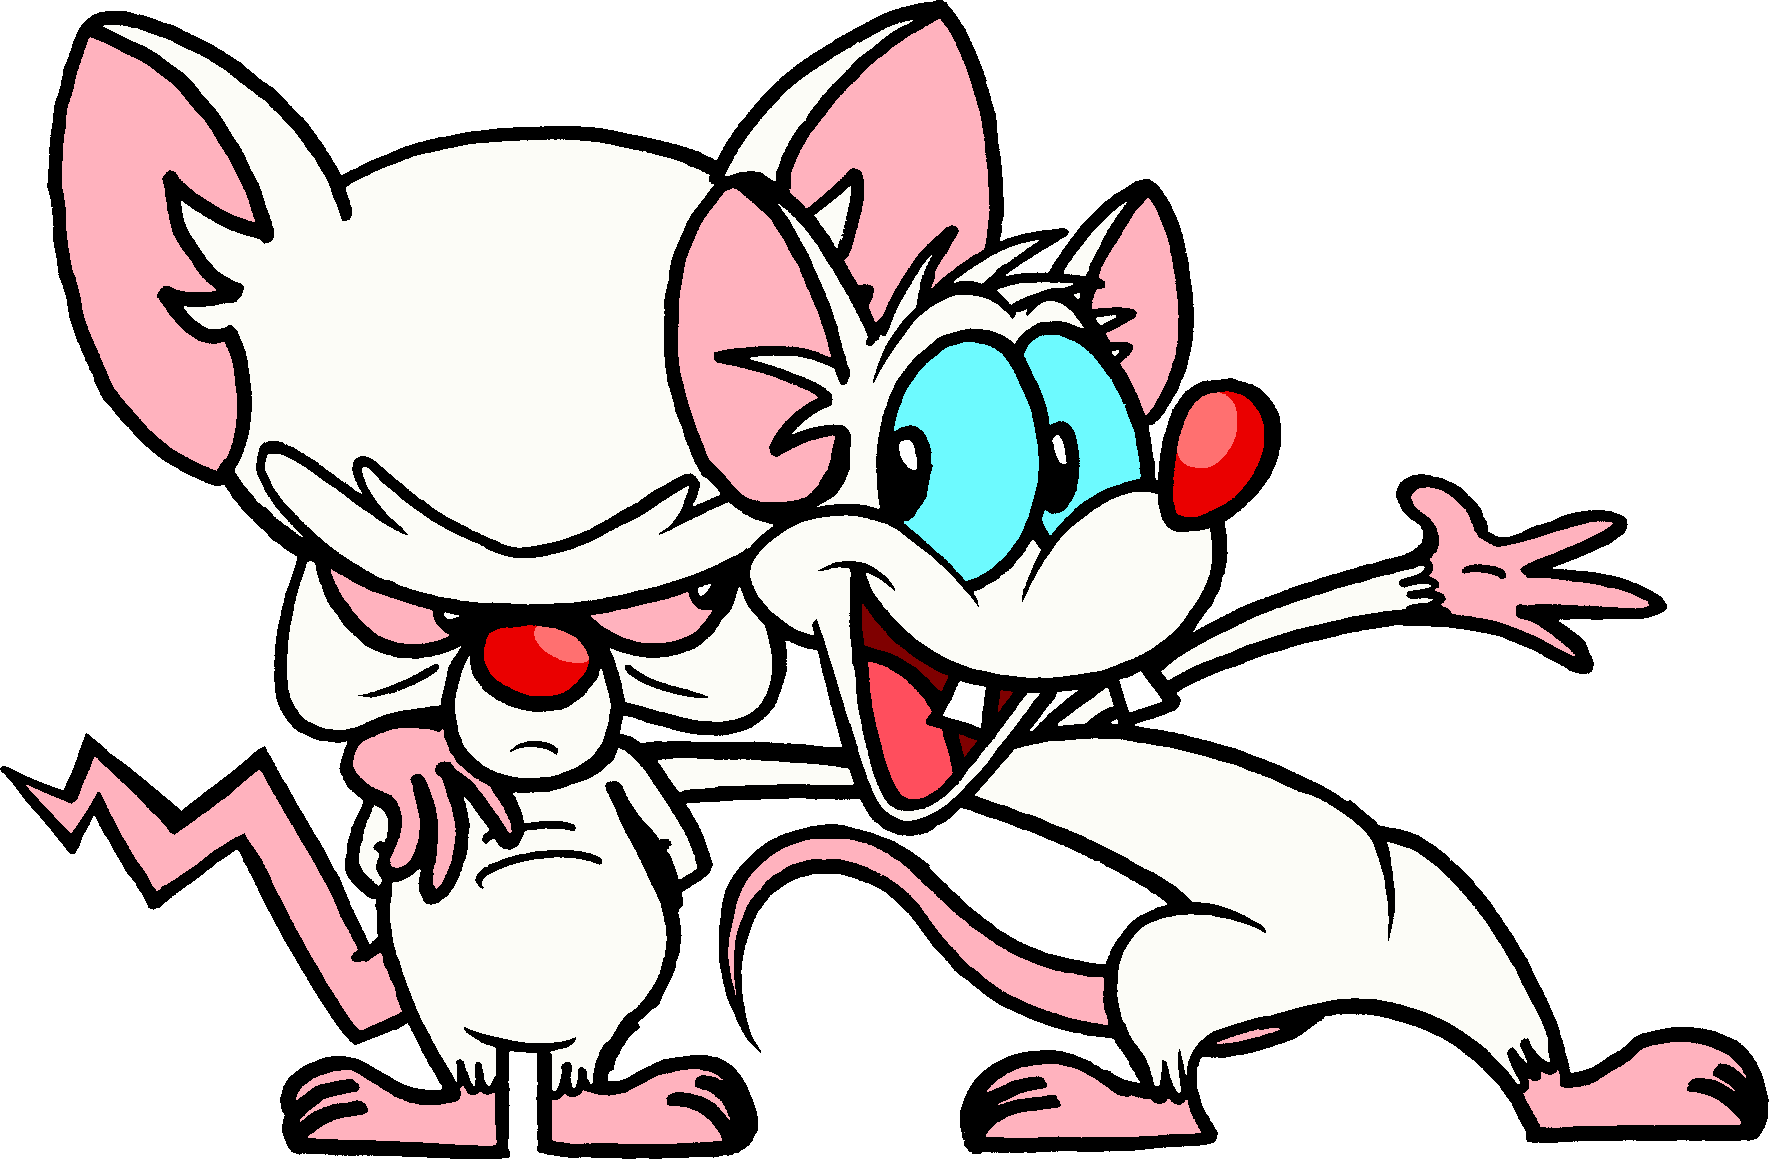 Pinky and the Brain by CaptainQuack64 on DeviantArt